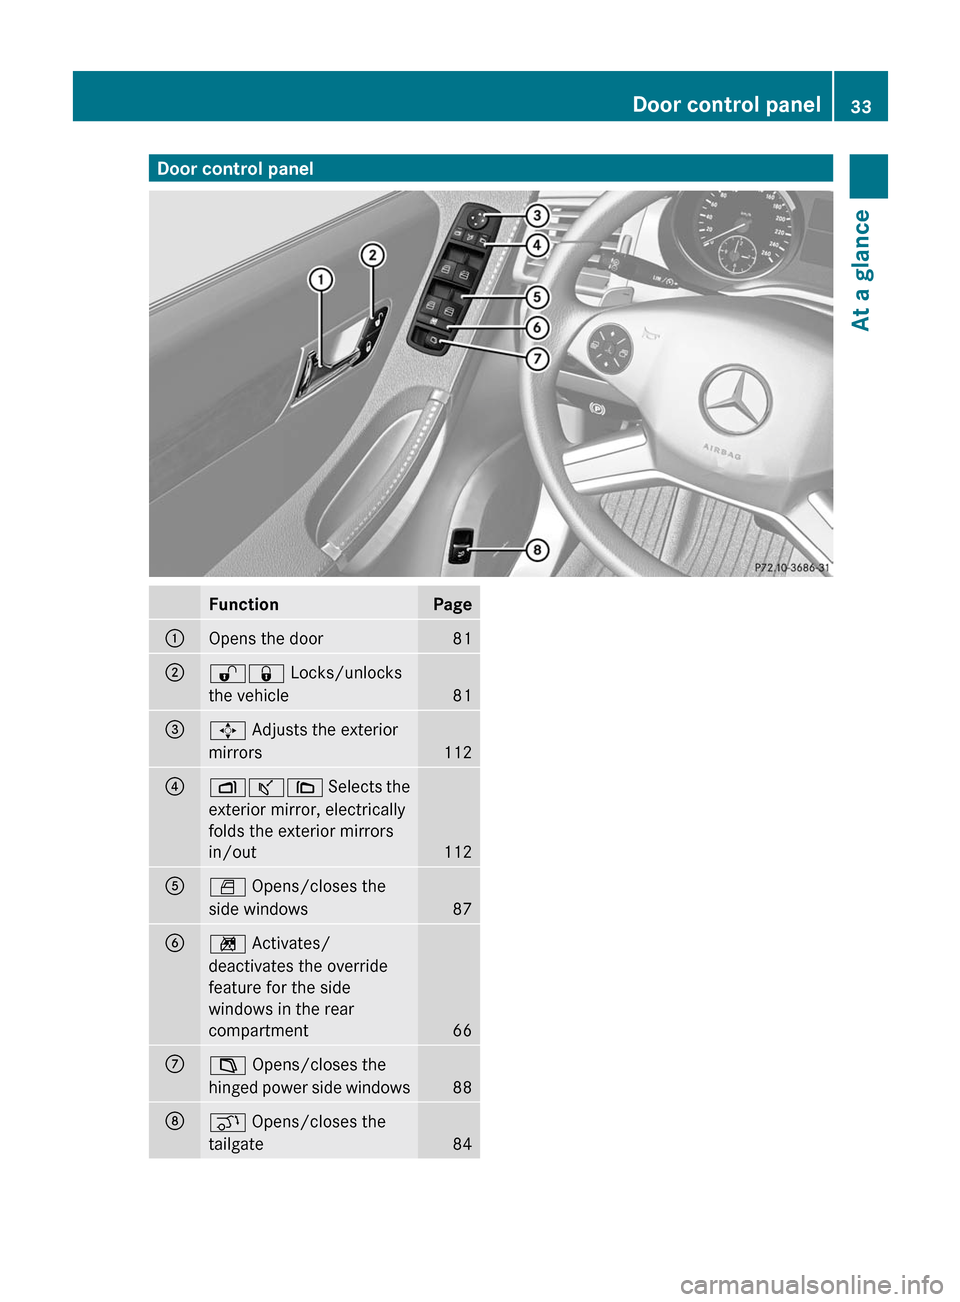 MERCEDES-BENZ R-Class 2011 W251 Owners Guide Door control panelFunctionPage:Opens the door81;%& Locks/unlocks
the vehicle
81
=7  Adjusts the exterior
mirrors
112
?Zª\  Selects the
exterior mirror, electrically
folds the exterior mirrors
in/out
